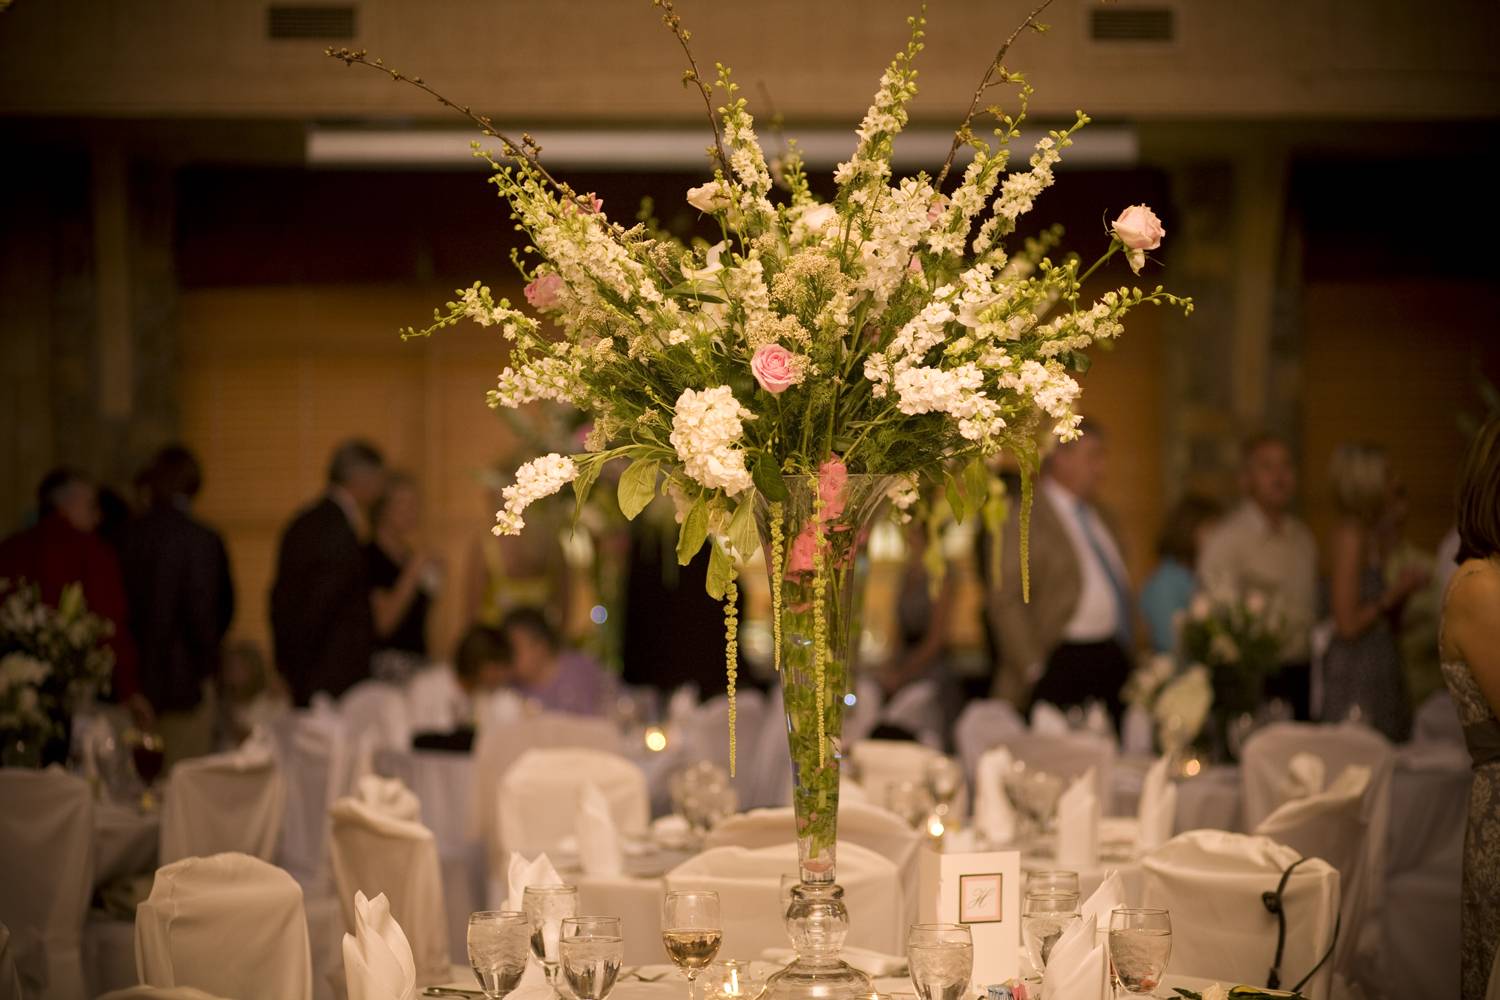 How To Determine The Size Of Floral Arrangements In Reception Spaces